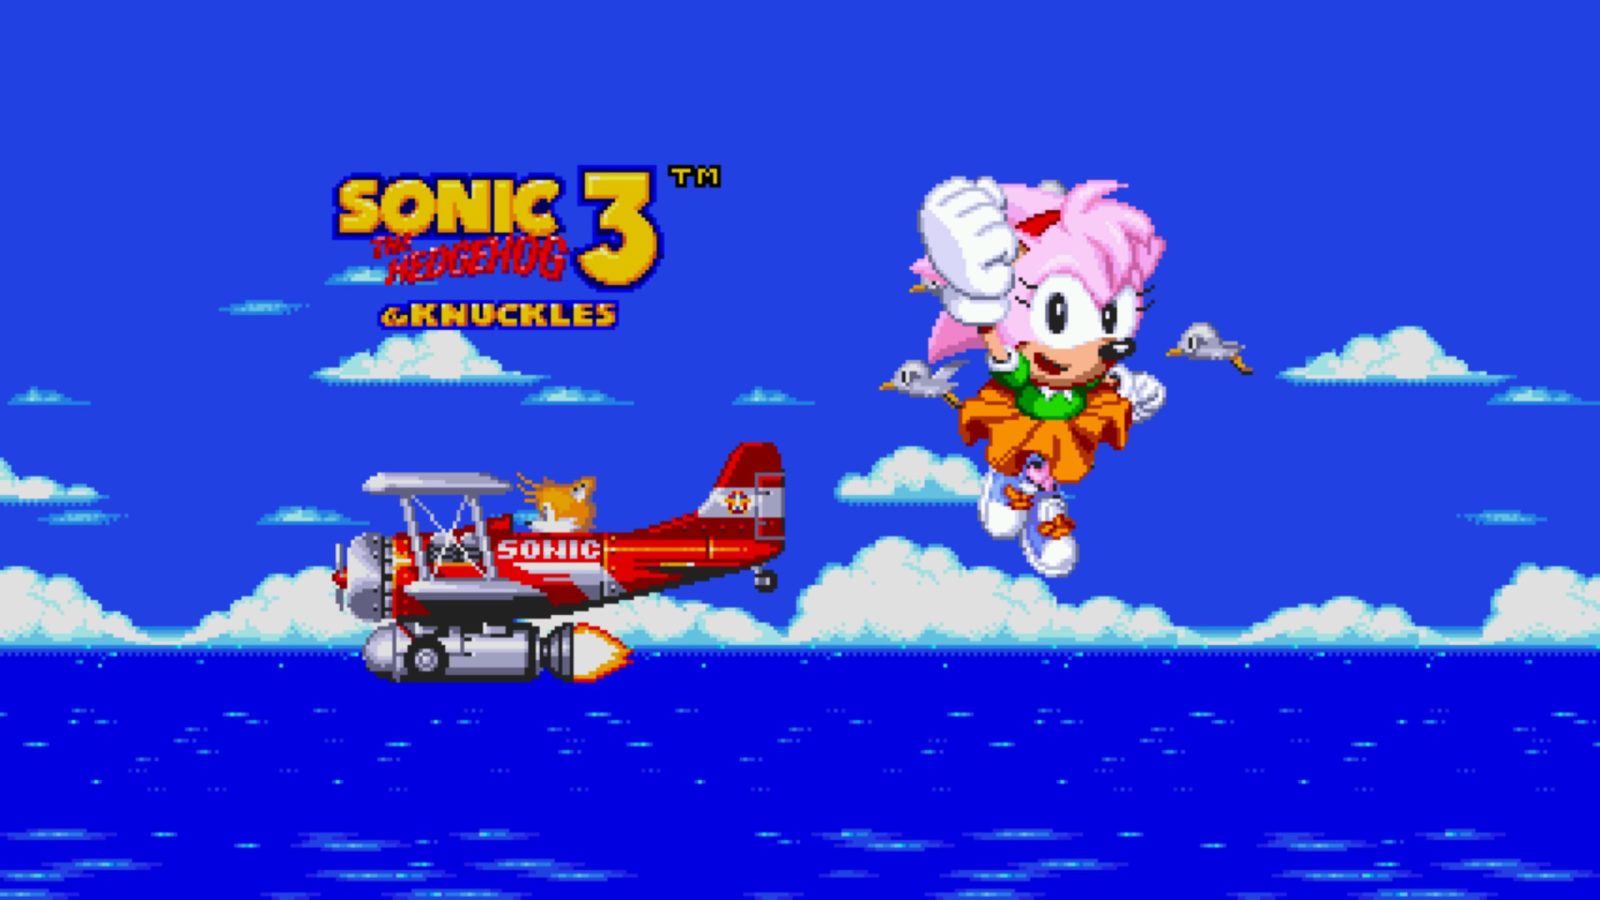 Sonic 3 Complete Review - The full Sonic 3 package? 